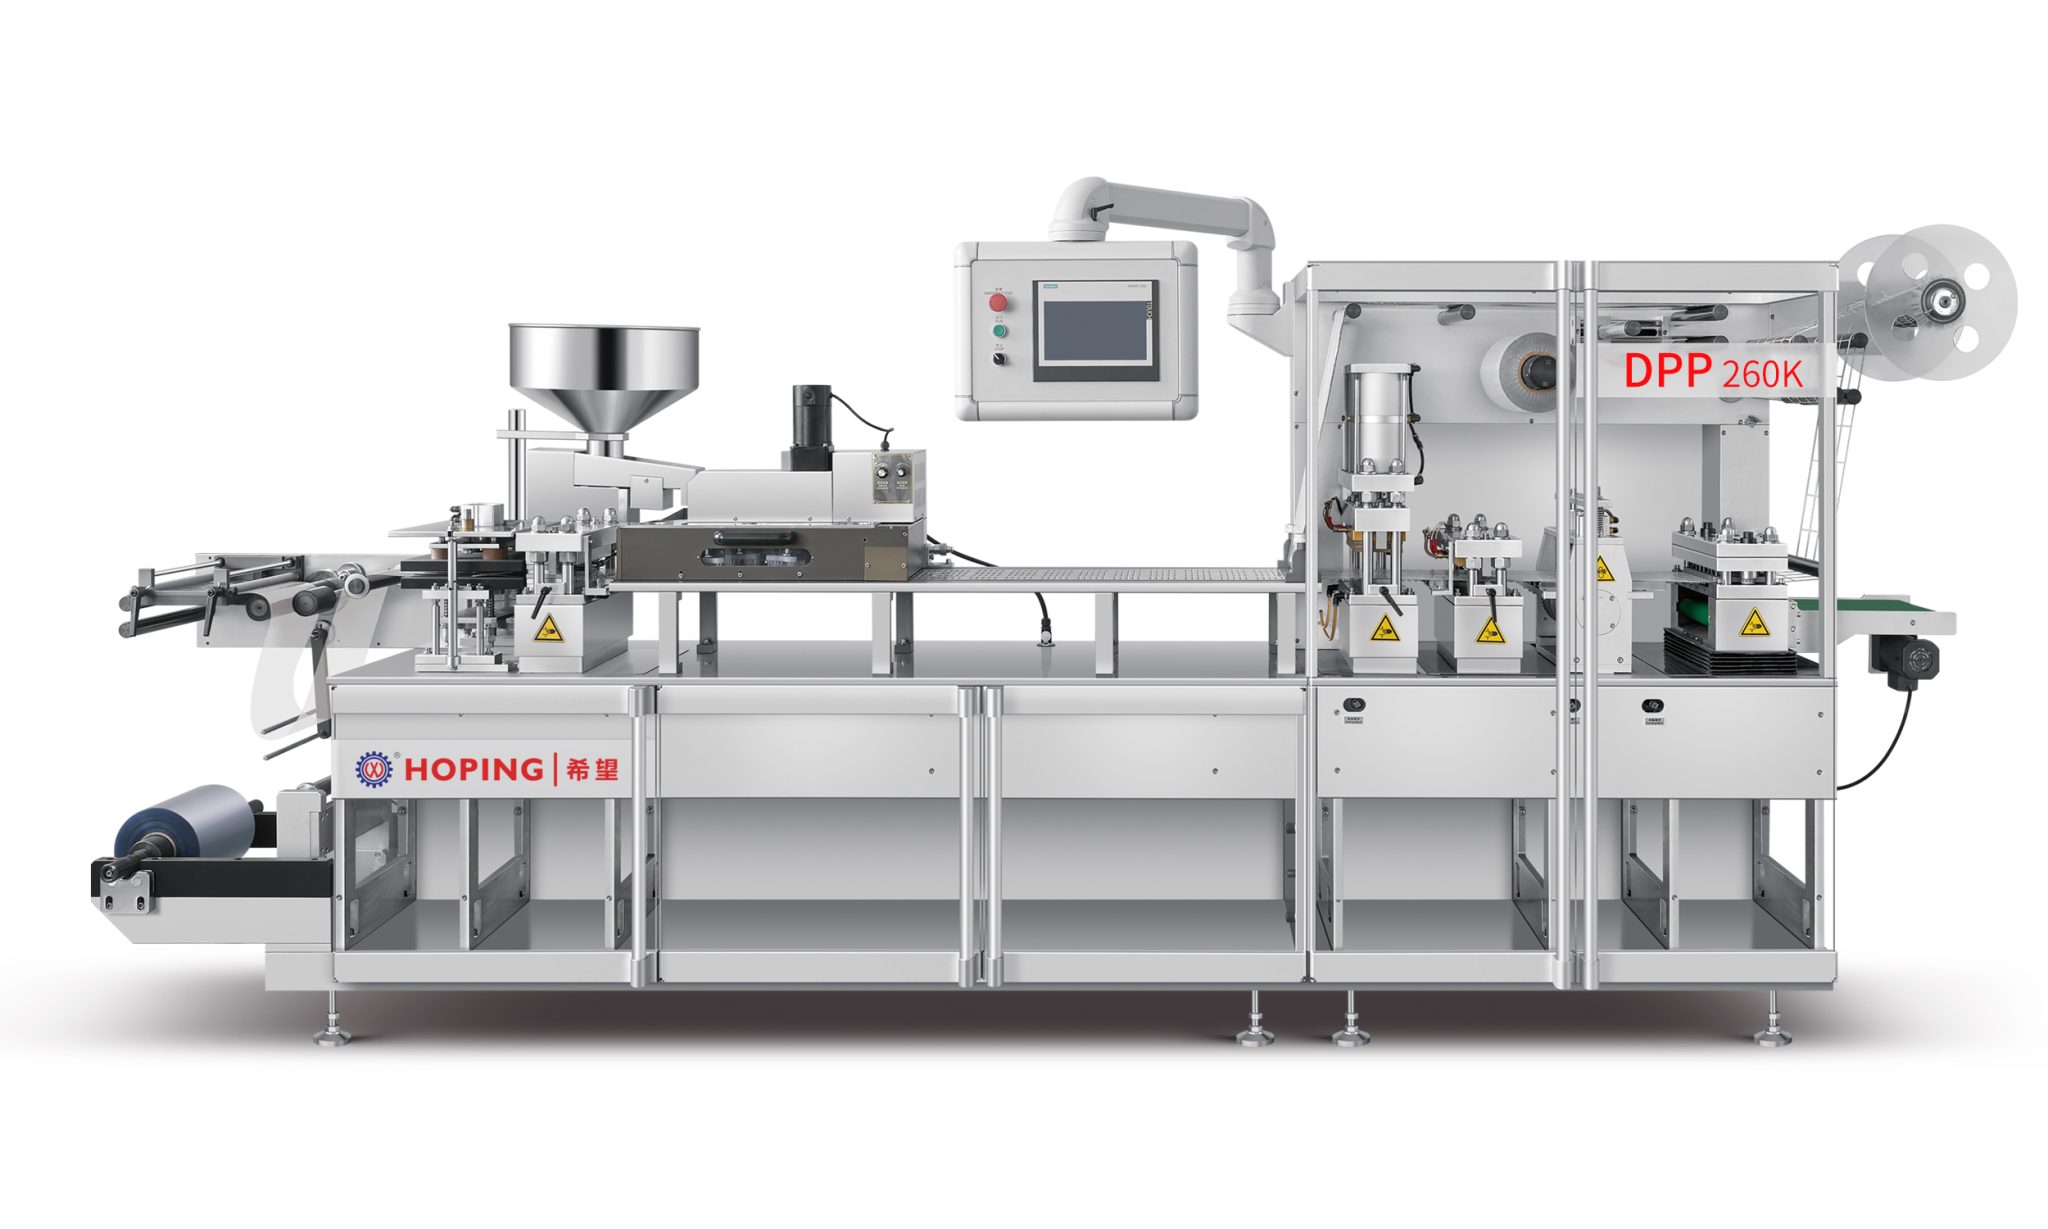 Blister packaging machines are being widely used